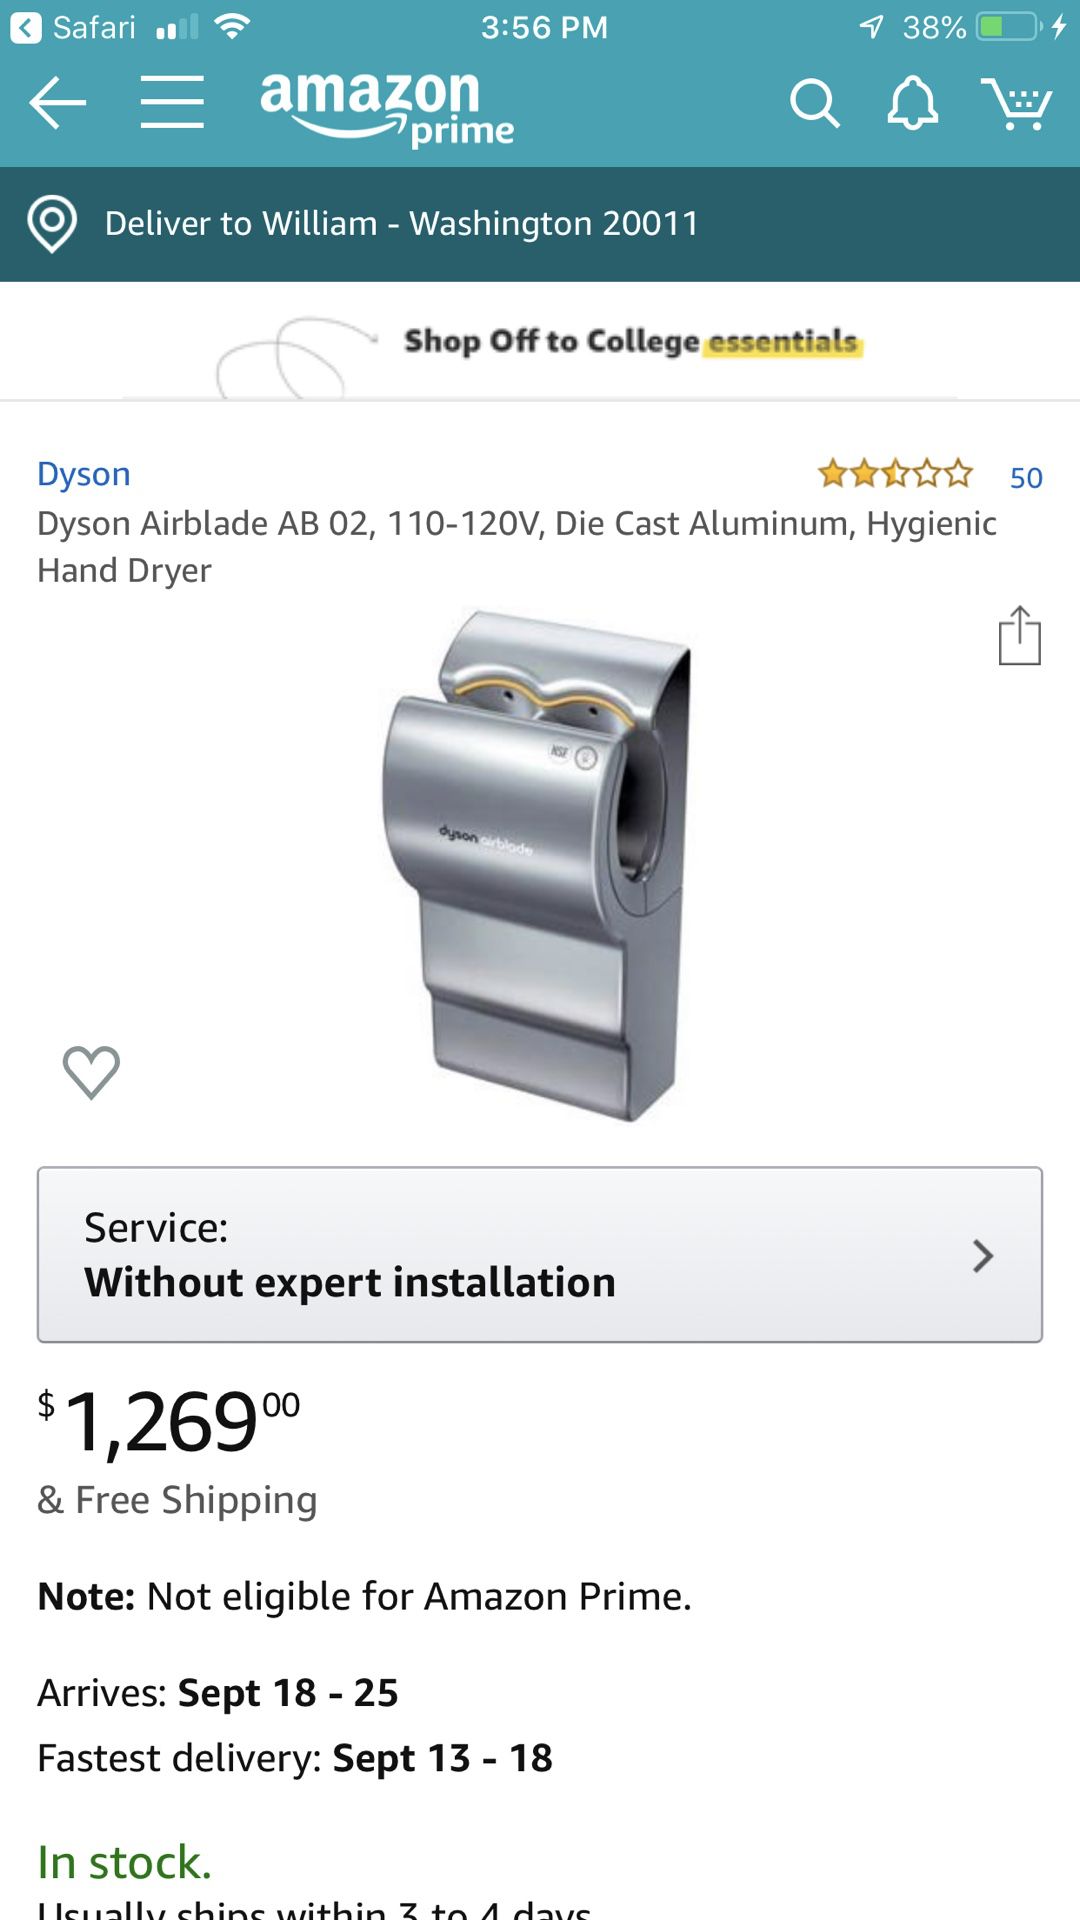 Dyson hand drier almost new.